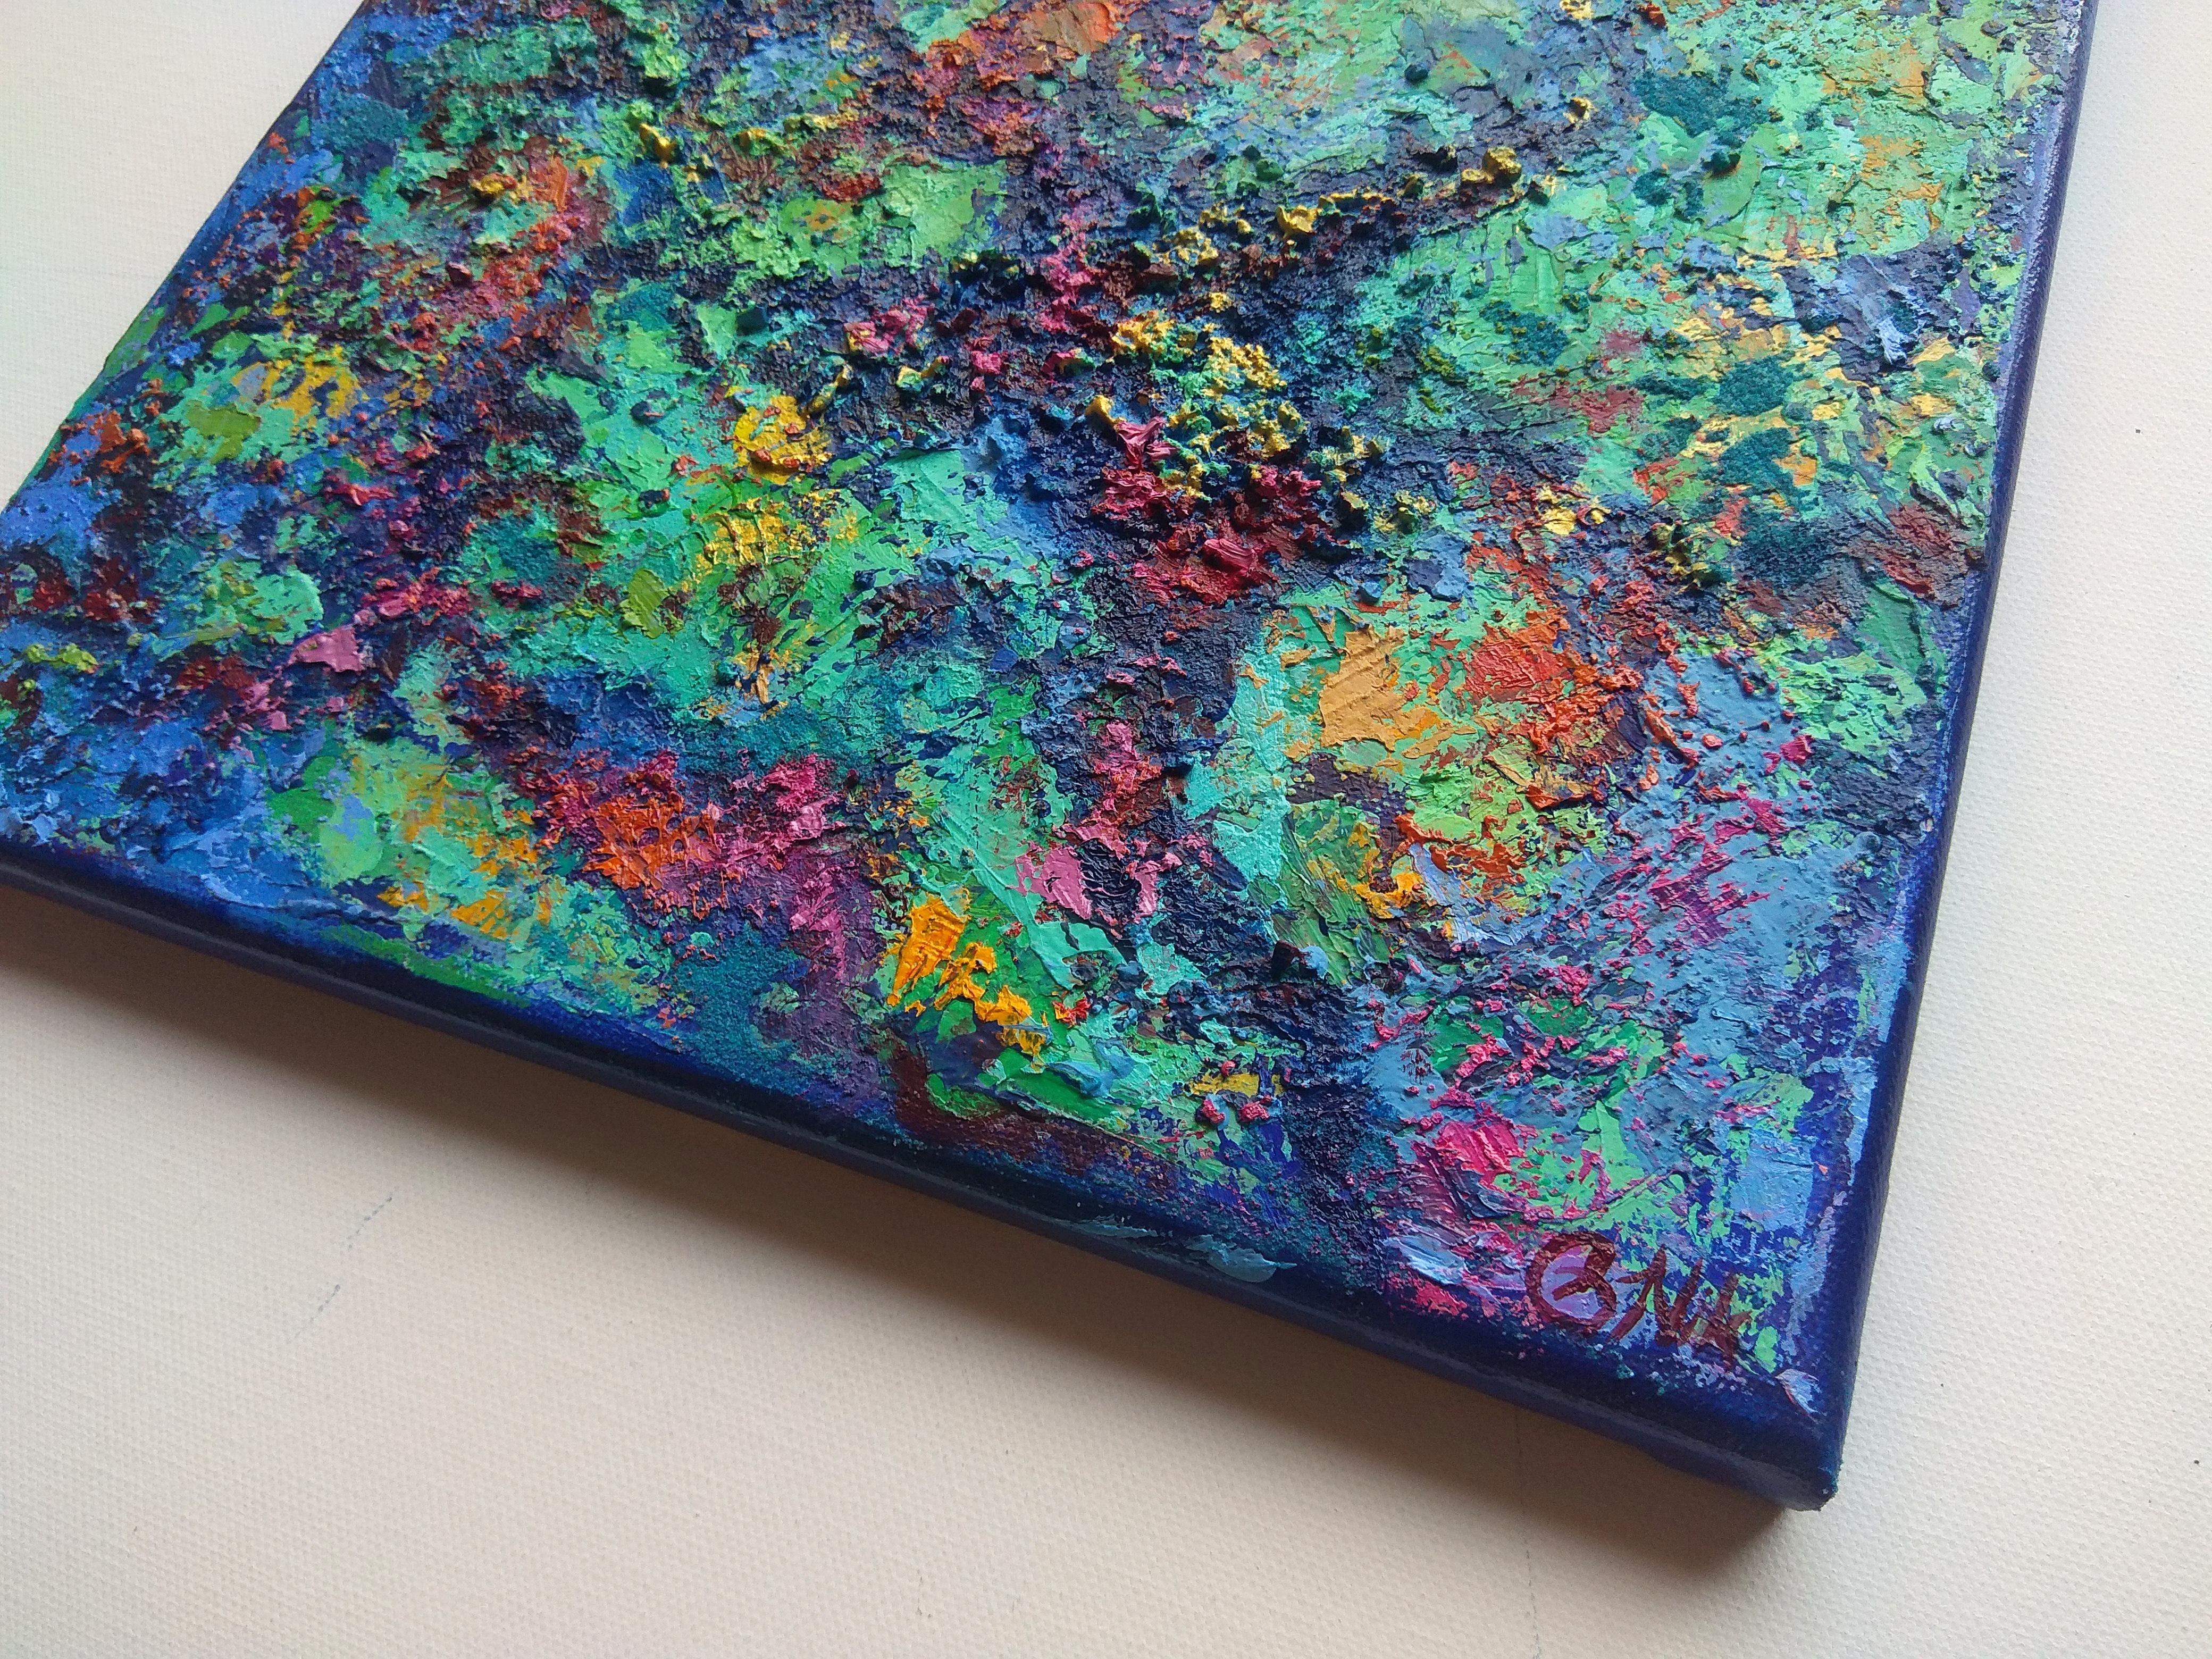 Caribbean Coral Reef Textured Painting For Sale 4